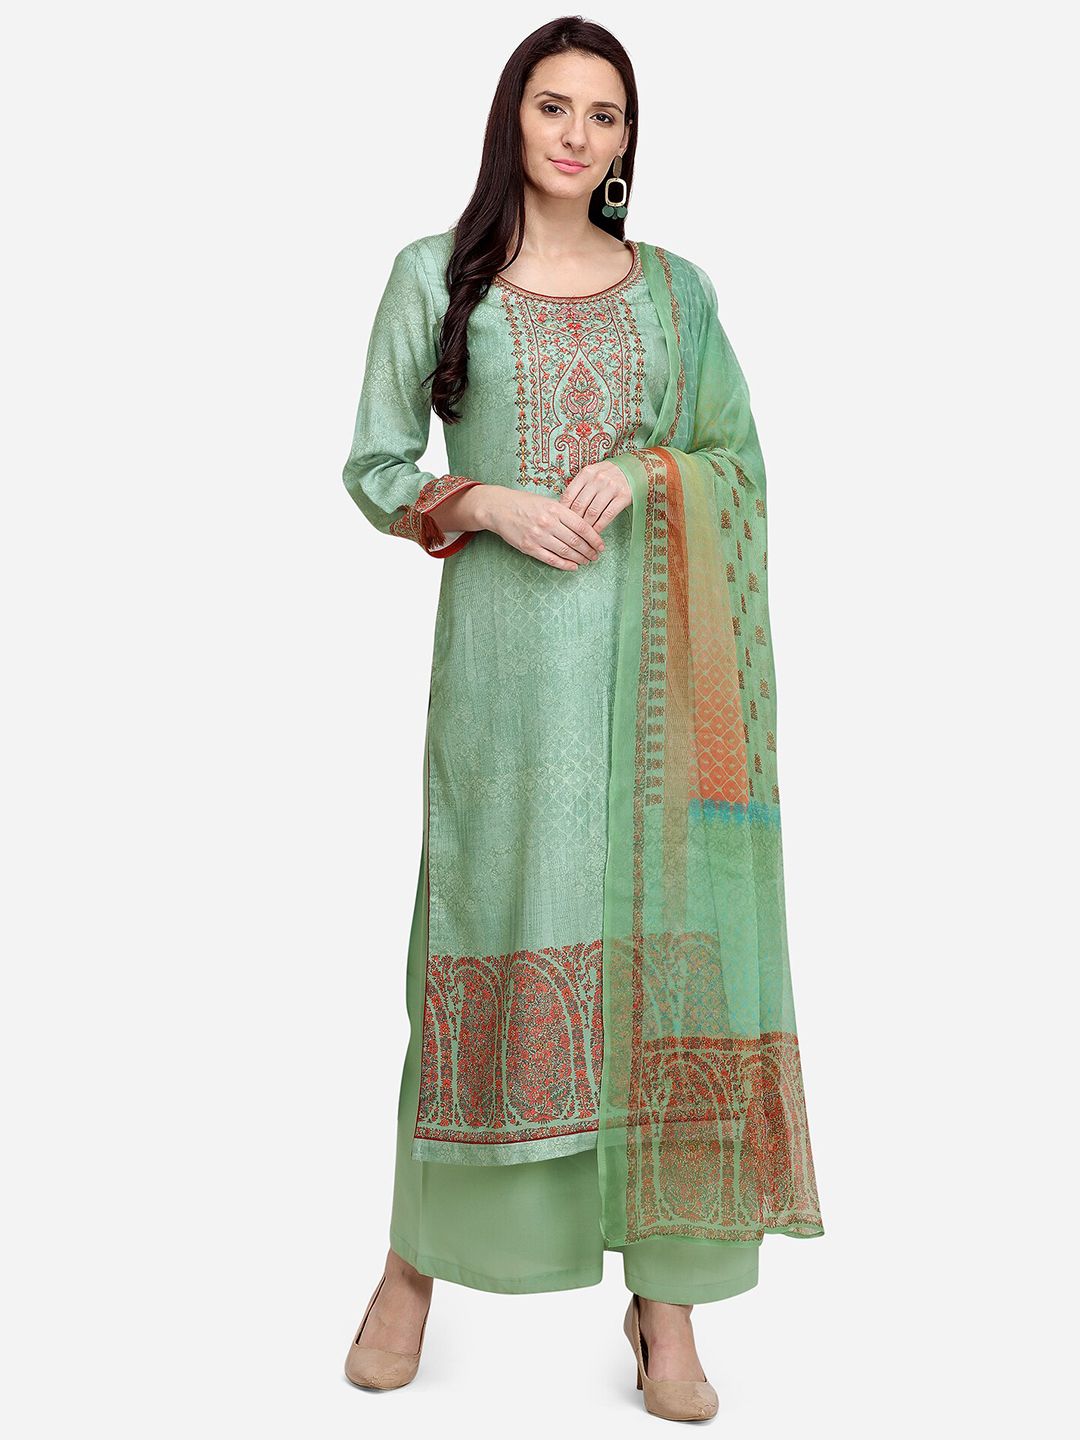 Stylee LIFESTYLE Green Embroidered Unstitched Dress Material Price in India